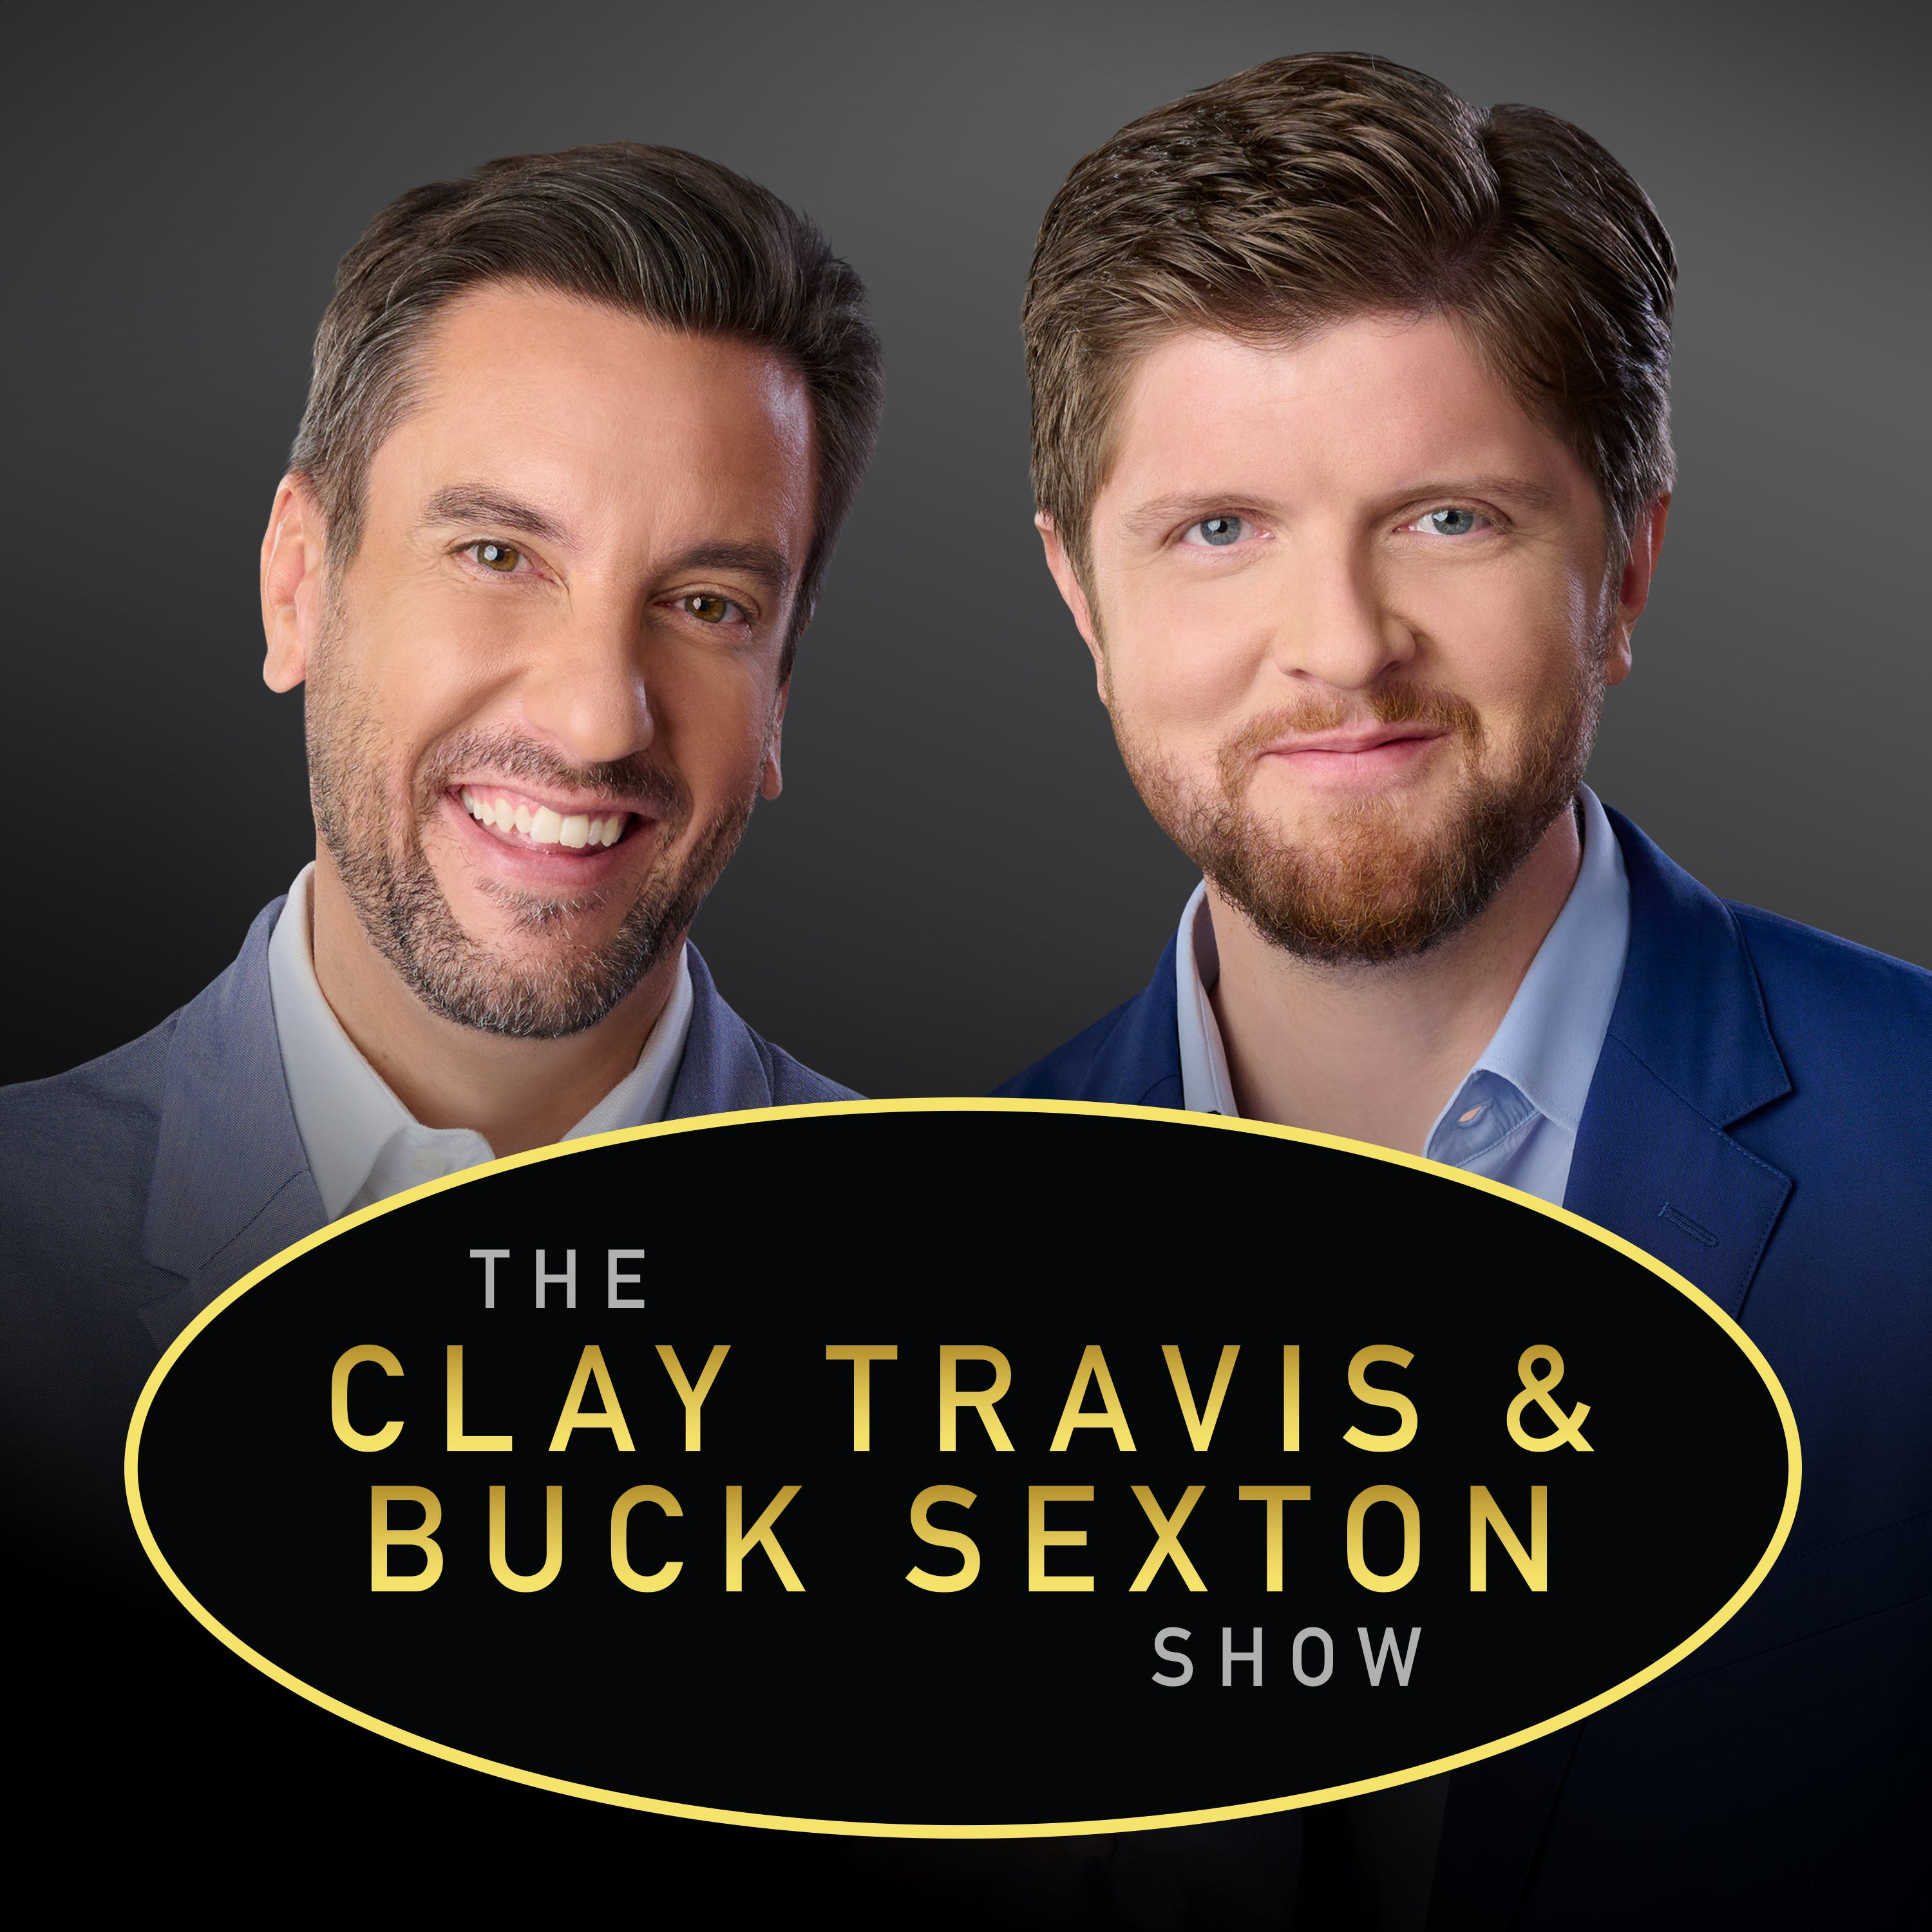 Clay Travis and Buck Sexton Show H2 – Sep 14 2021